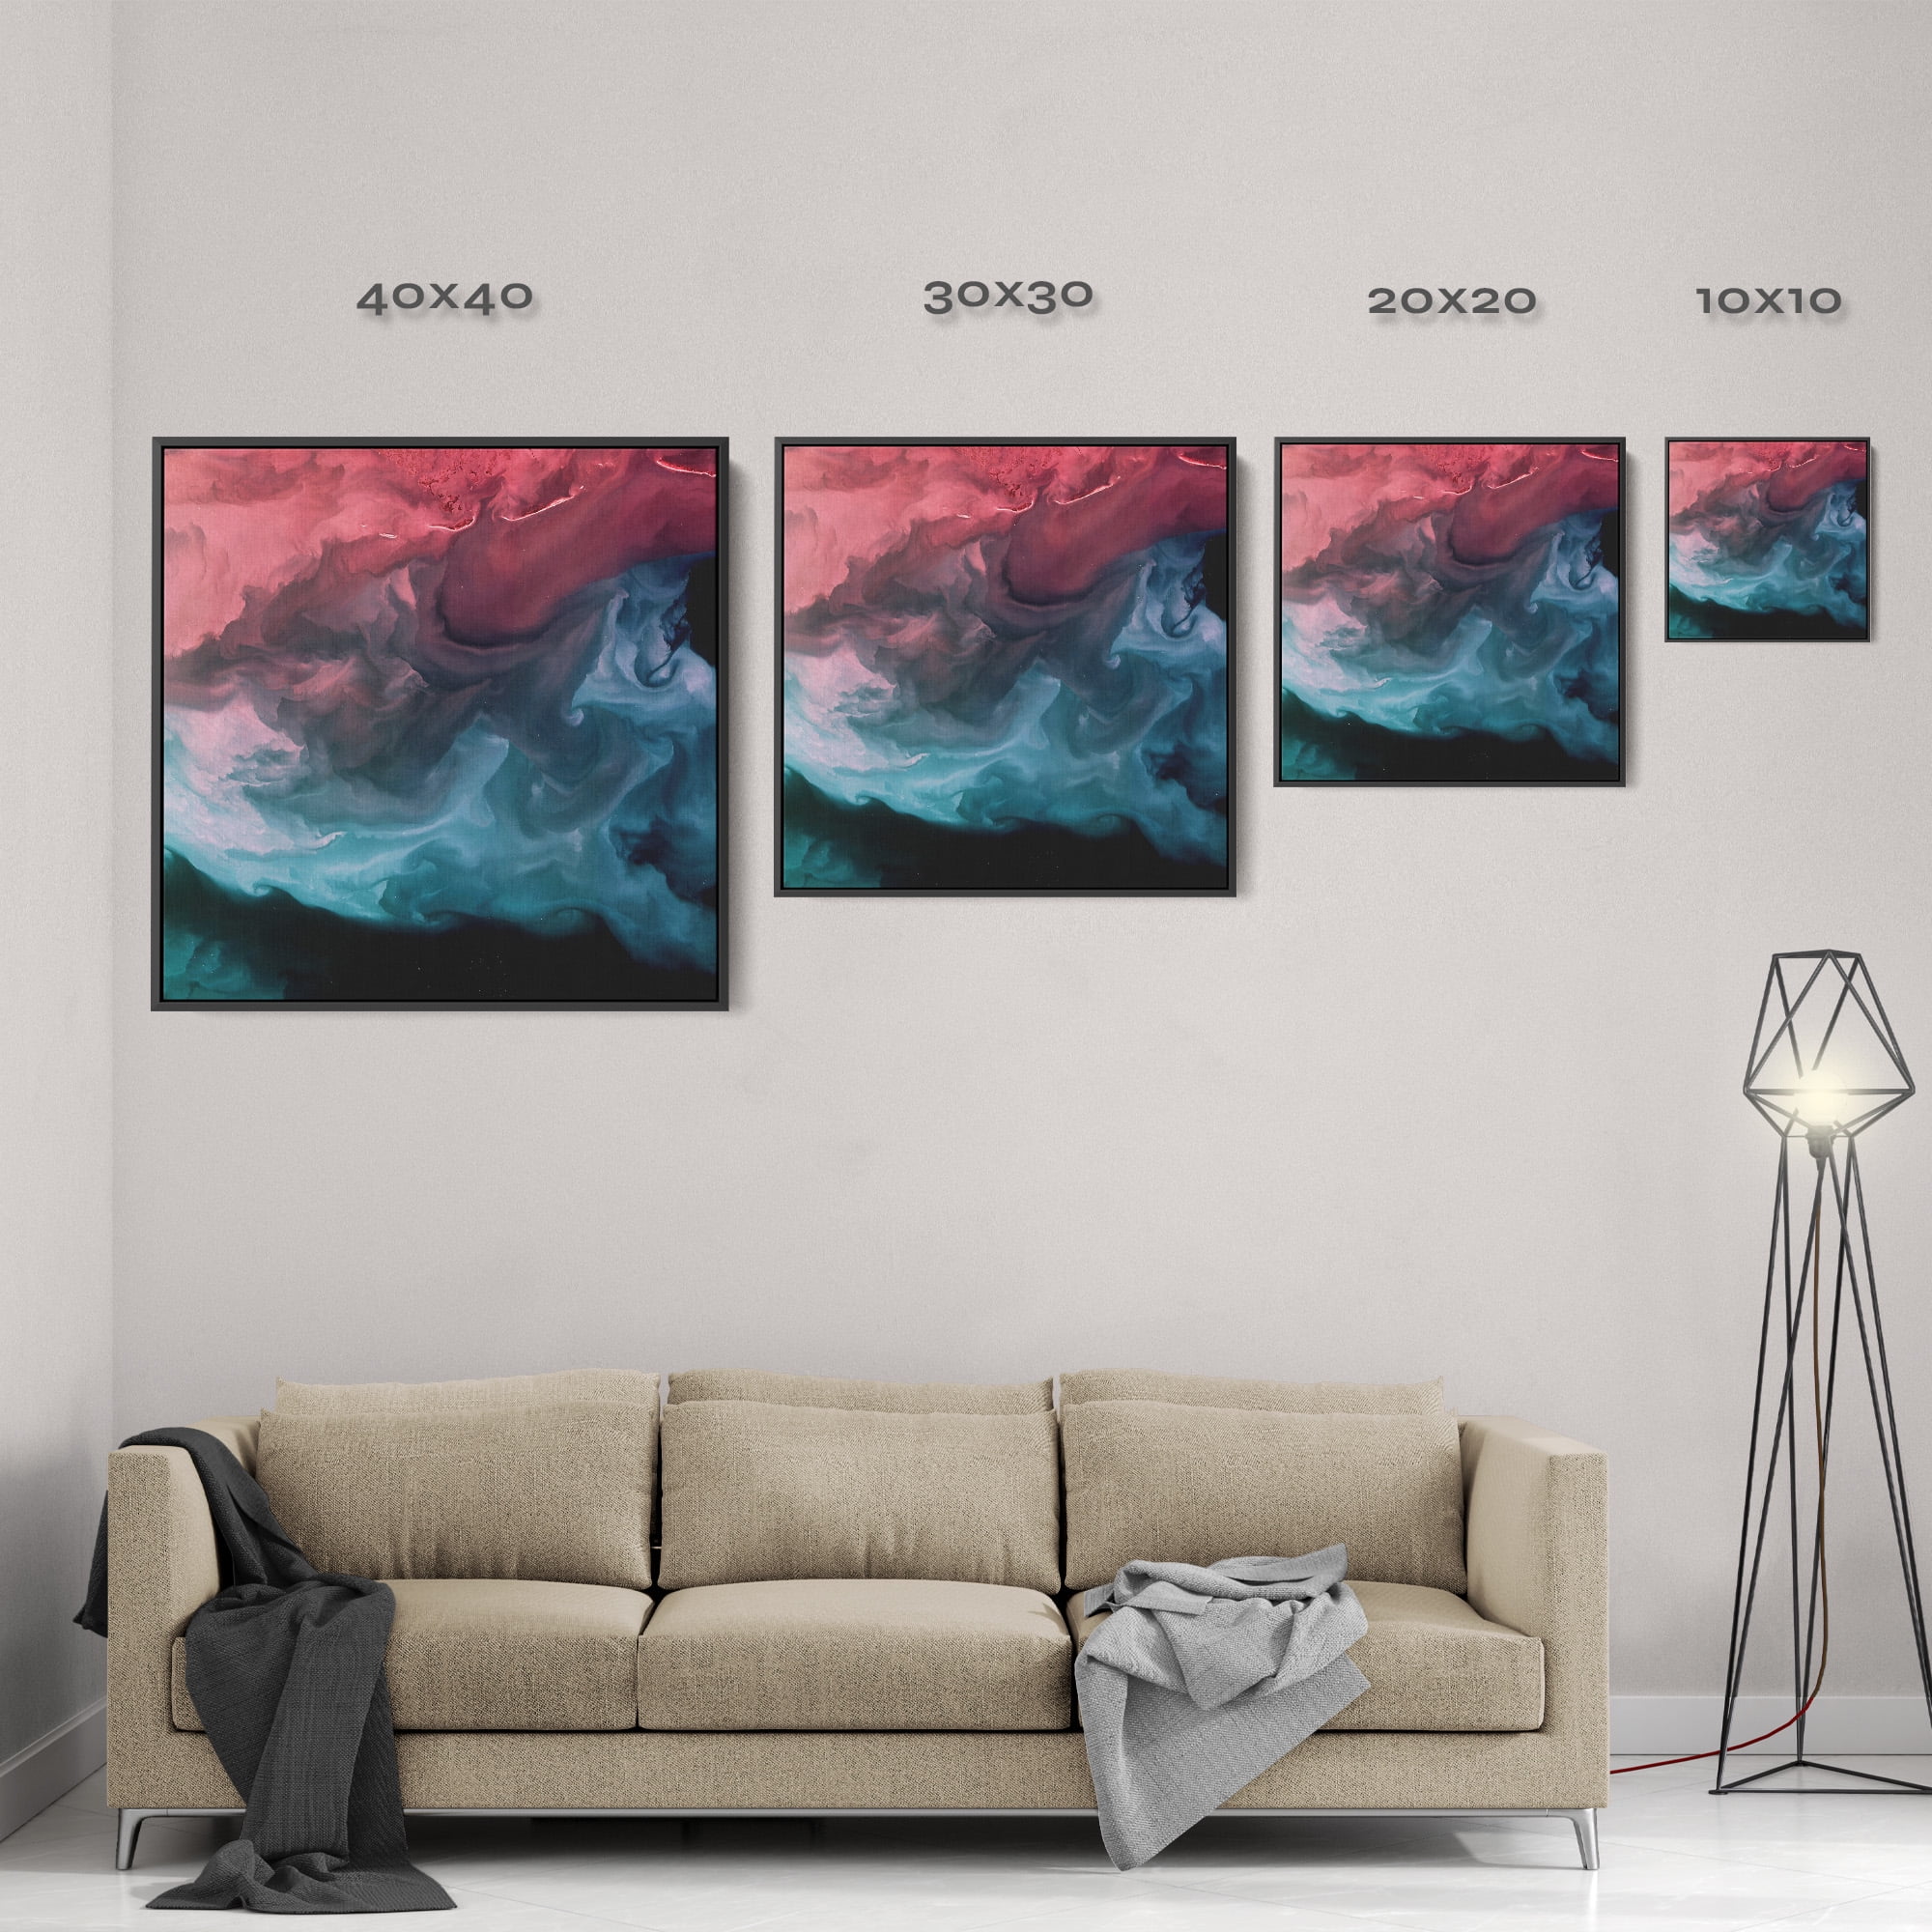  CloudShang José Altuve - Poster Poster Decorative Painting  Canvas Wall Art Living Room Posters Bedroom Painting. Frame-style,  16x24inch(40x60cm): Posters & Prints